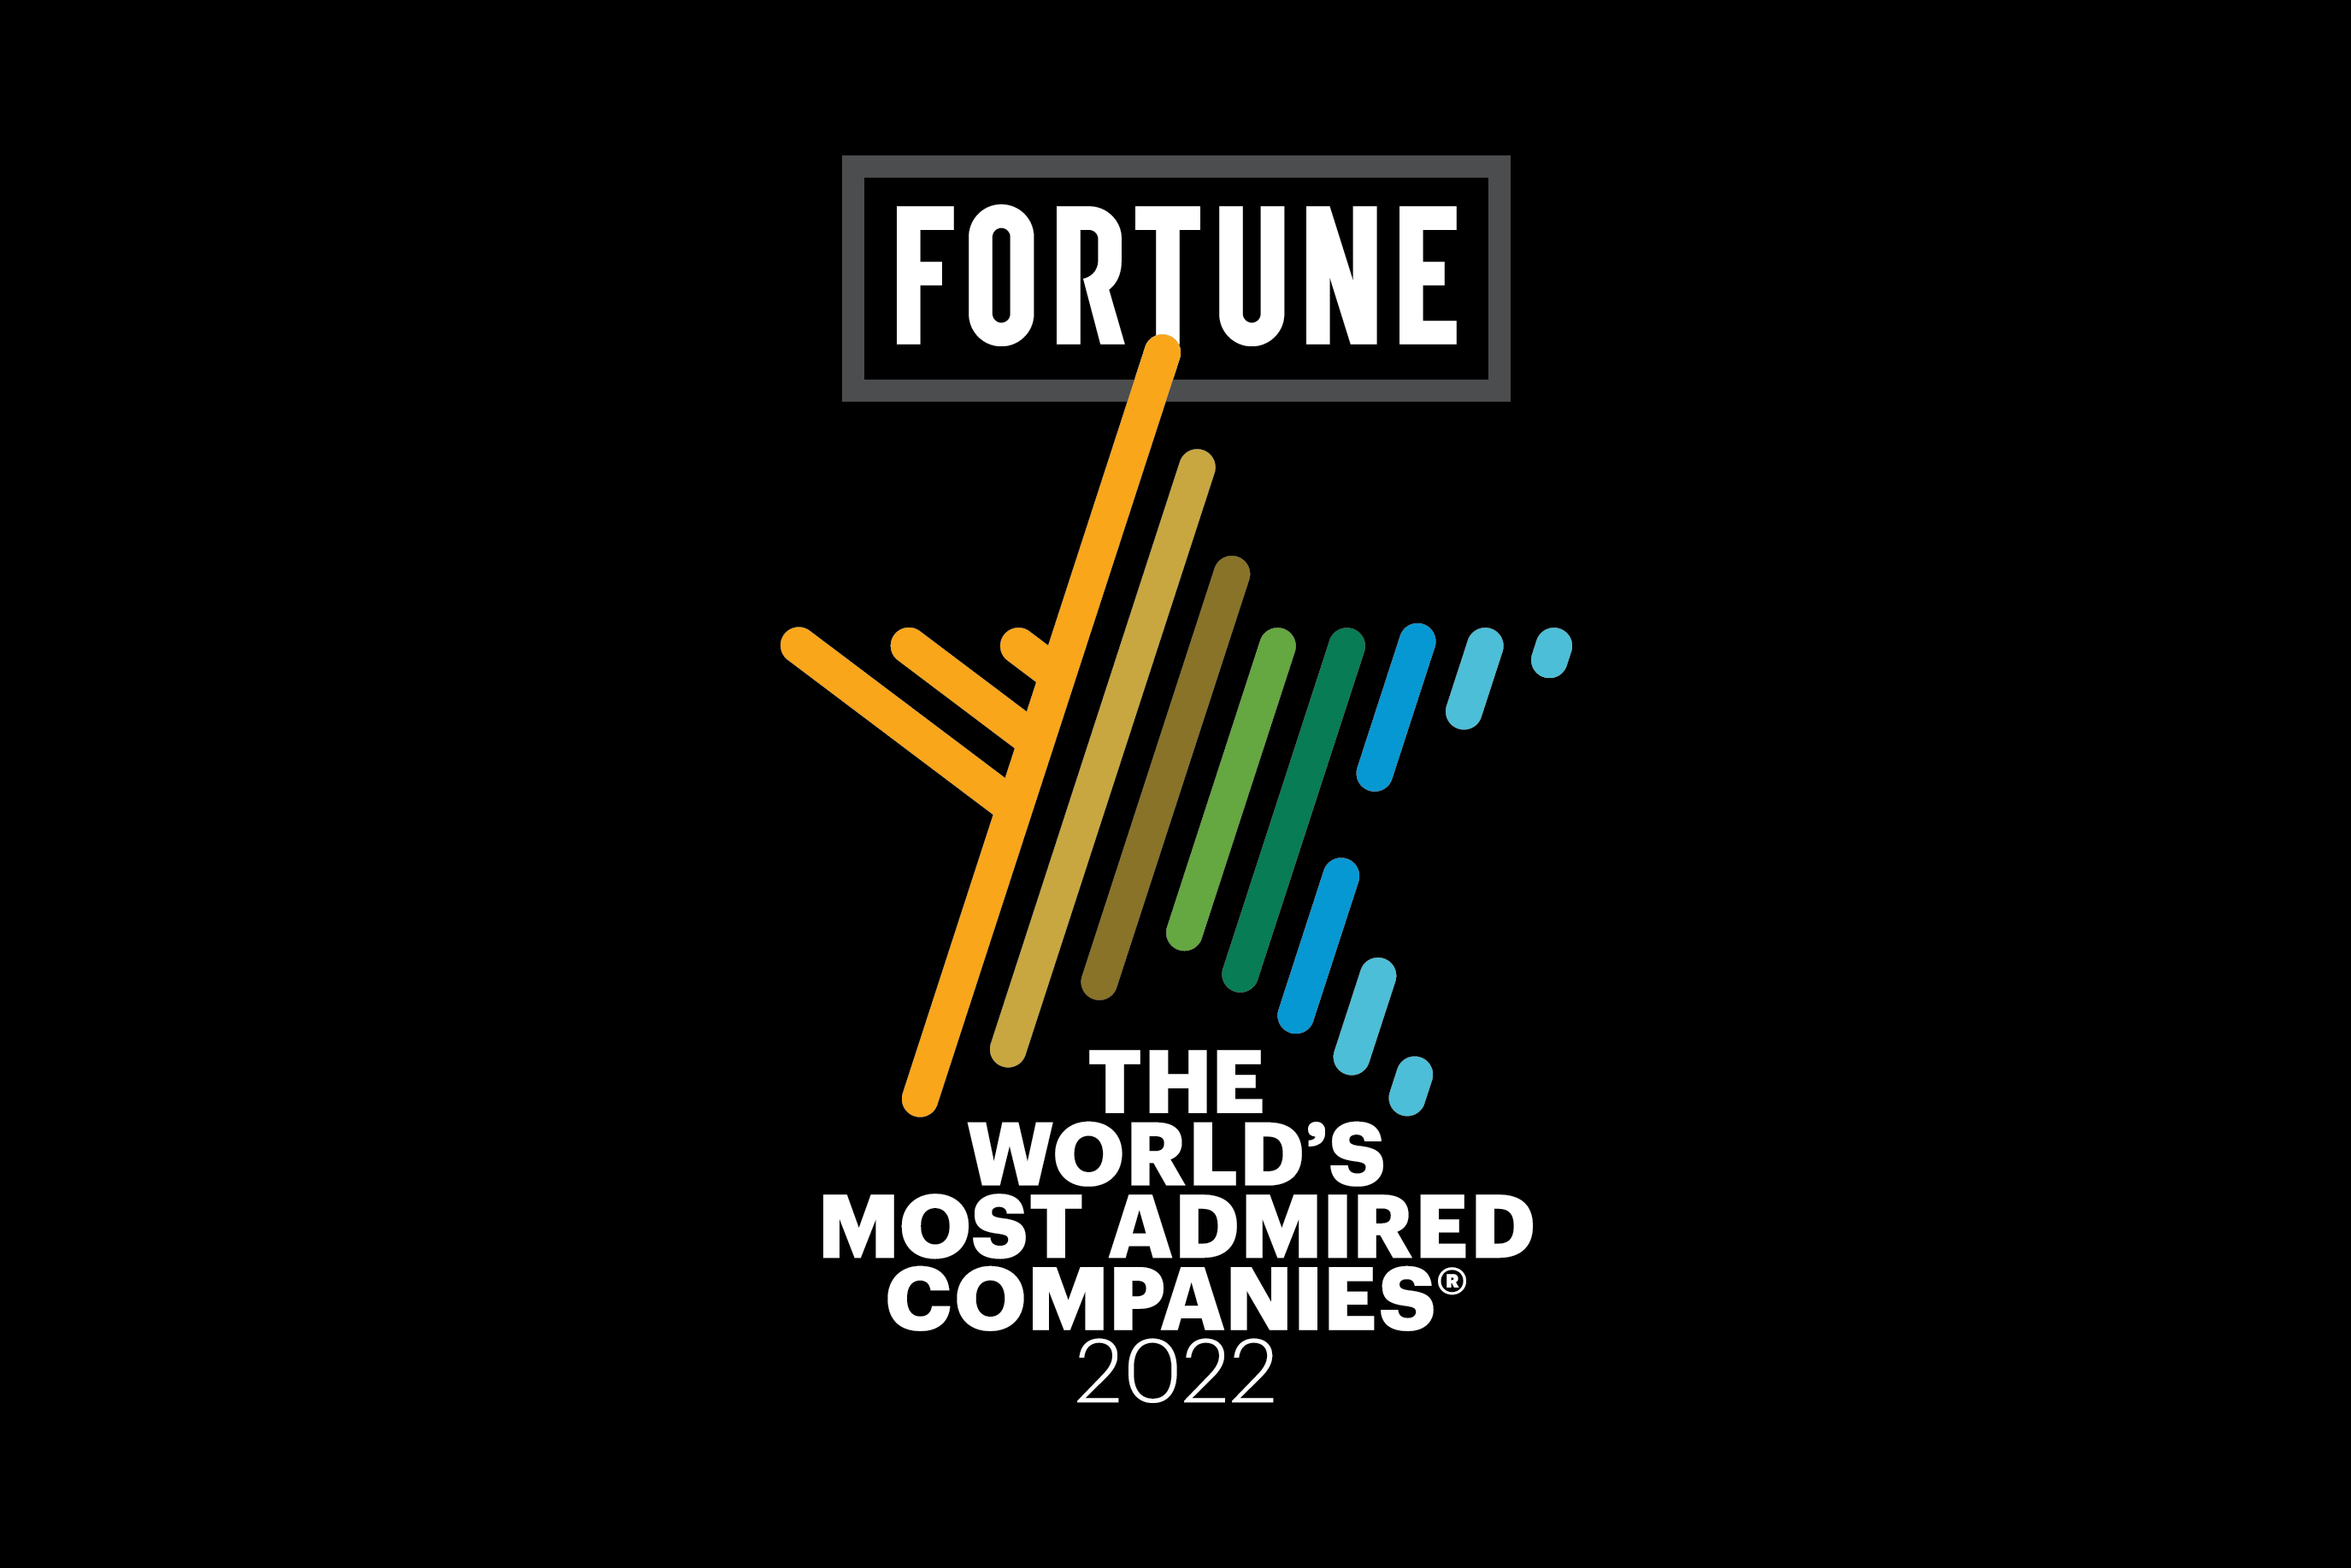 2022 Fortune World's Most Admired Companies star logo on a black background